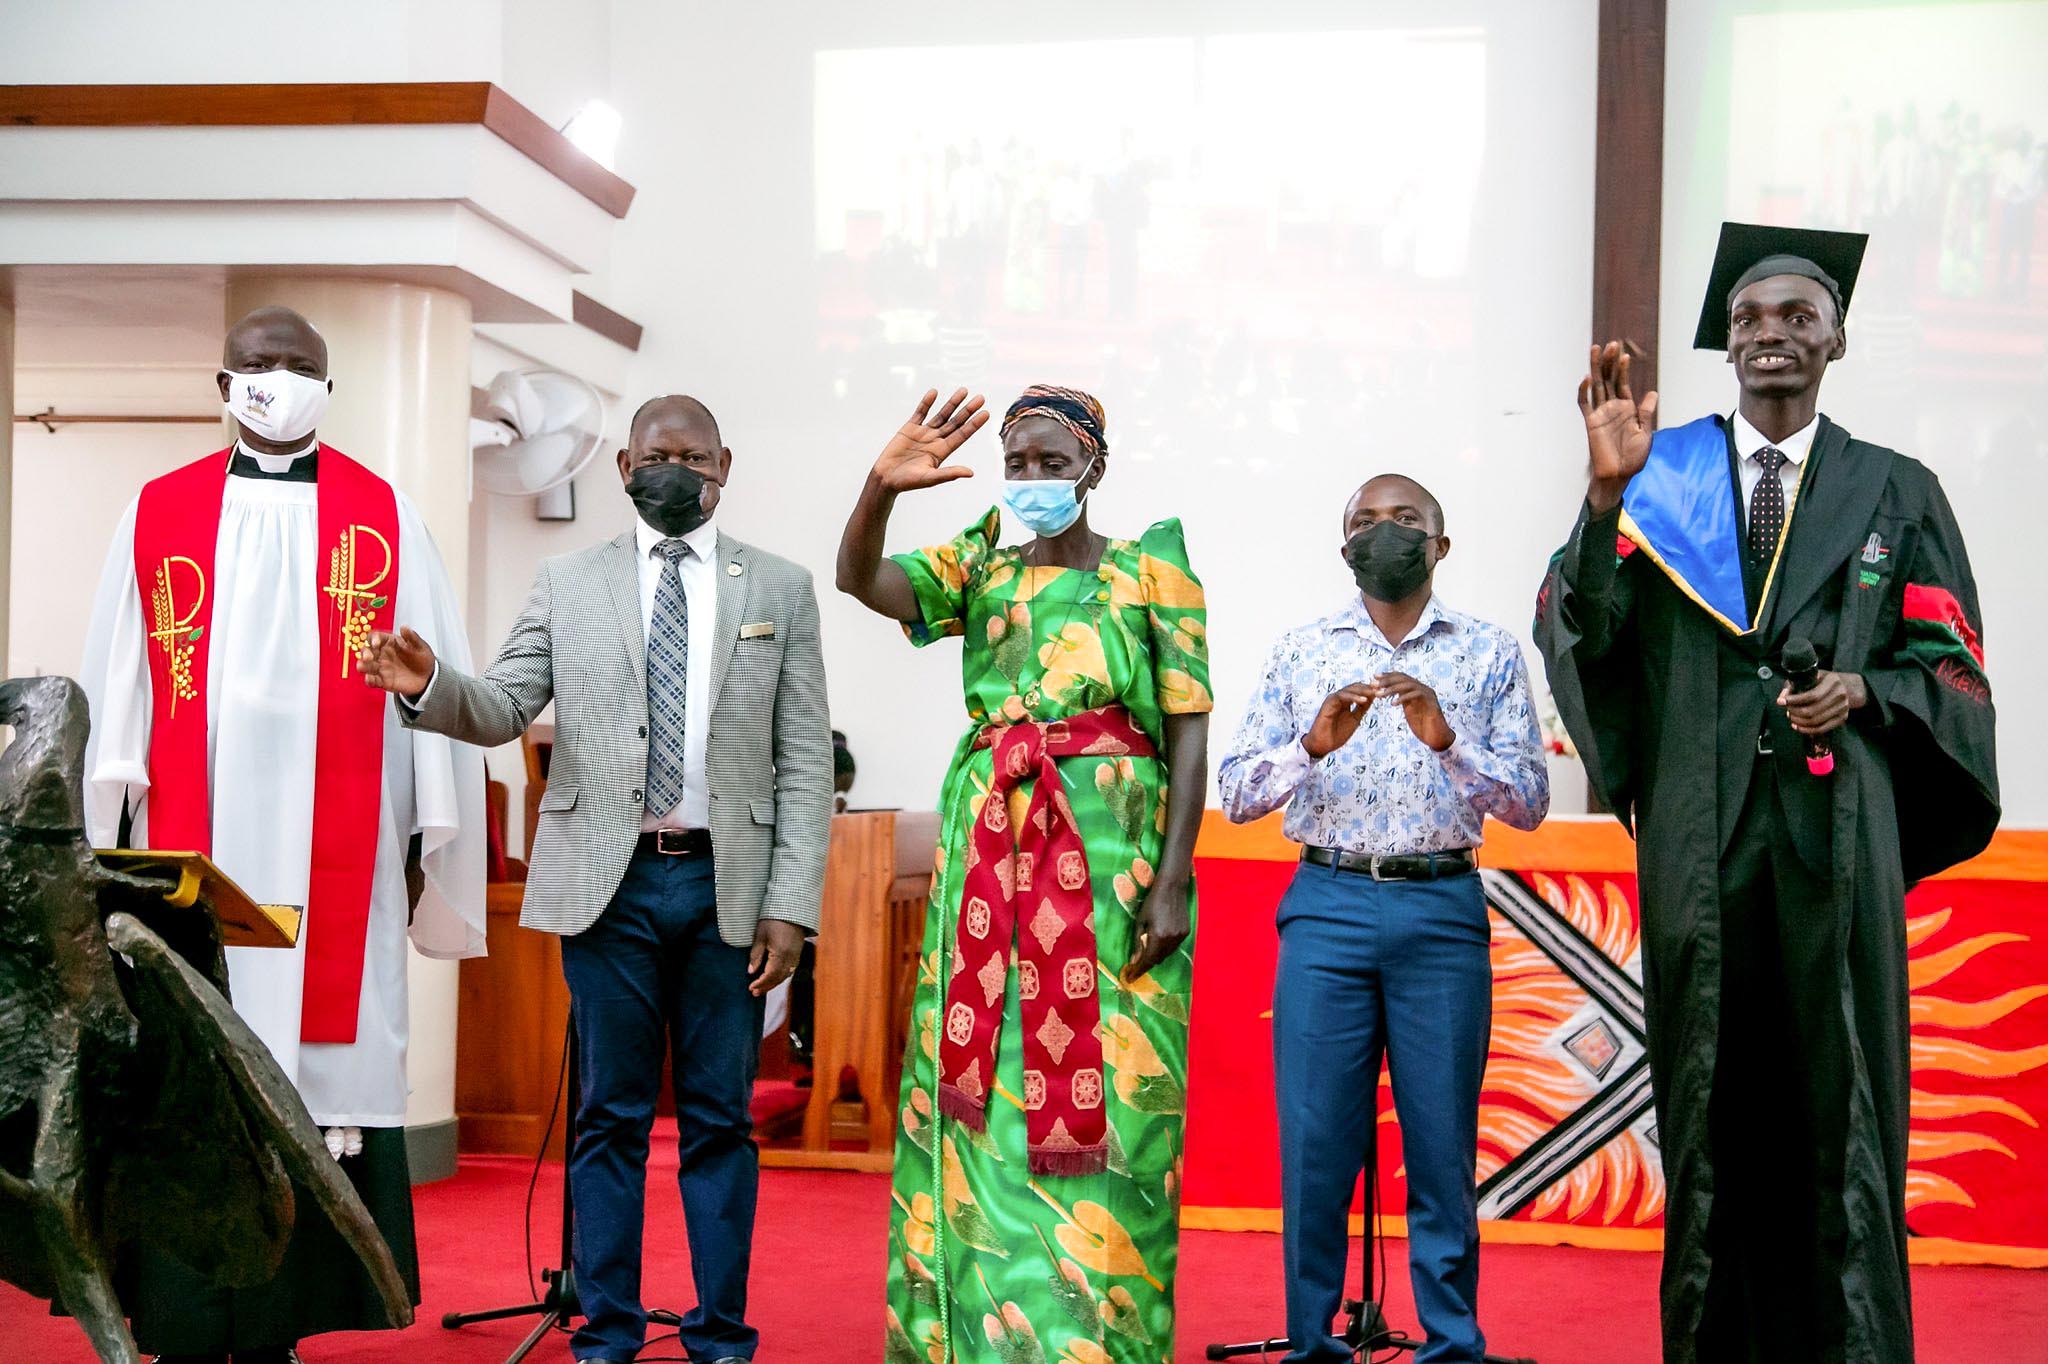 The Vice Chancellor, Prof. Barnabas Nawangwe (2nd L) and the Chaplain, Rev. Can. Onesimus Asiimwe (L) with #Mak71stGrad's best Bachelor of Commerce Student, Mr. Mpireyenki Aaron (R) and his family during the service on 23rd May 2021, St. Francis Chapel, Makerere University.